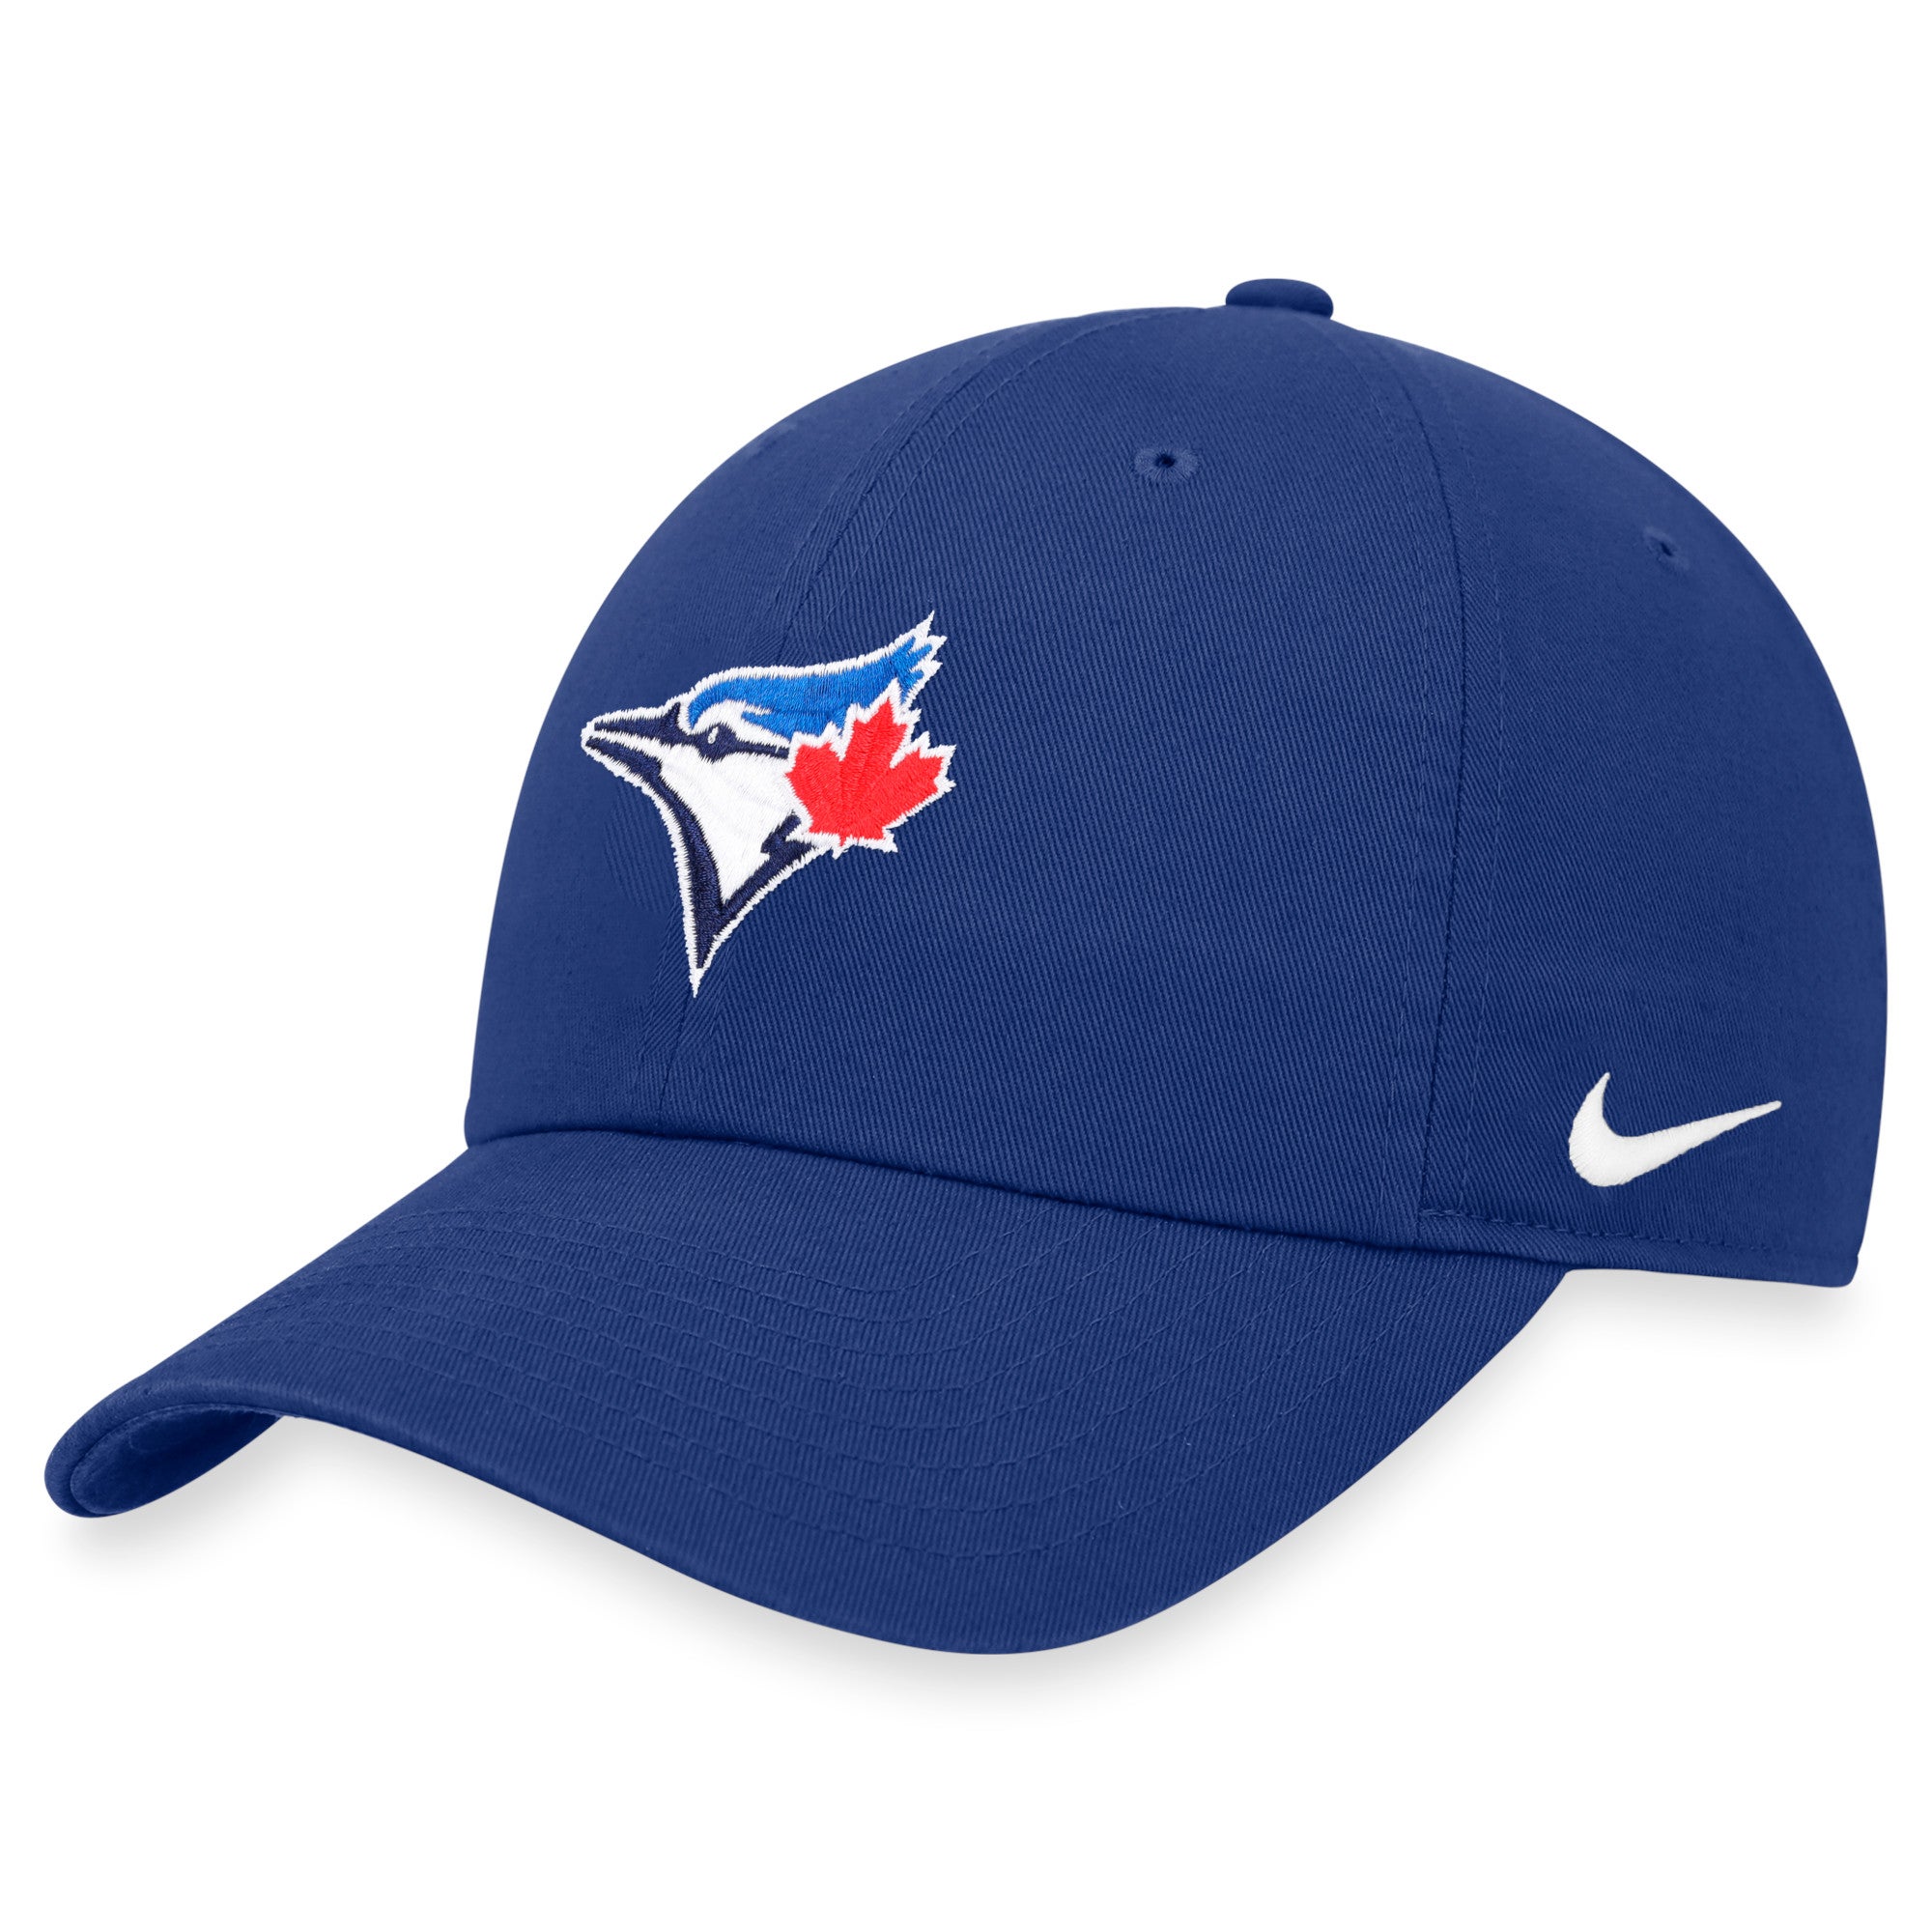 Lids Toronto Blue Jays Fanatics Branded Iconic Color Blocked Fitted Hat -  White/Royal